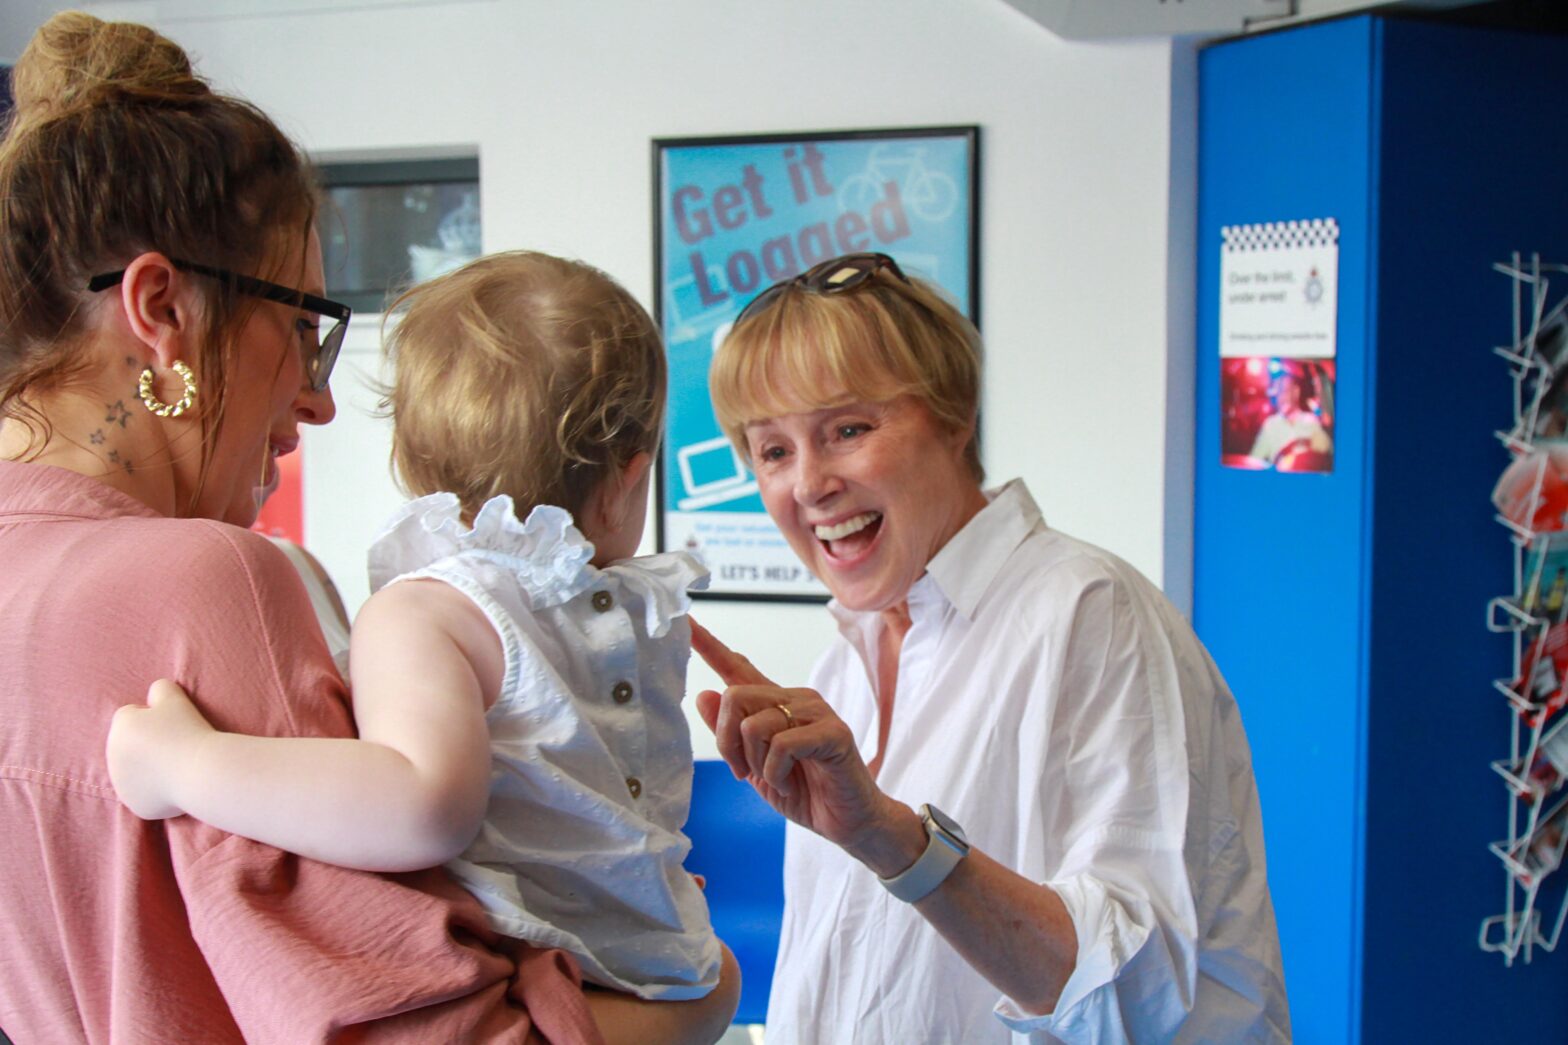 Sally Dynevor at the Coronation Street meet and greet, gently shaking a baby's hand with a warm smile.